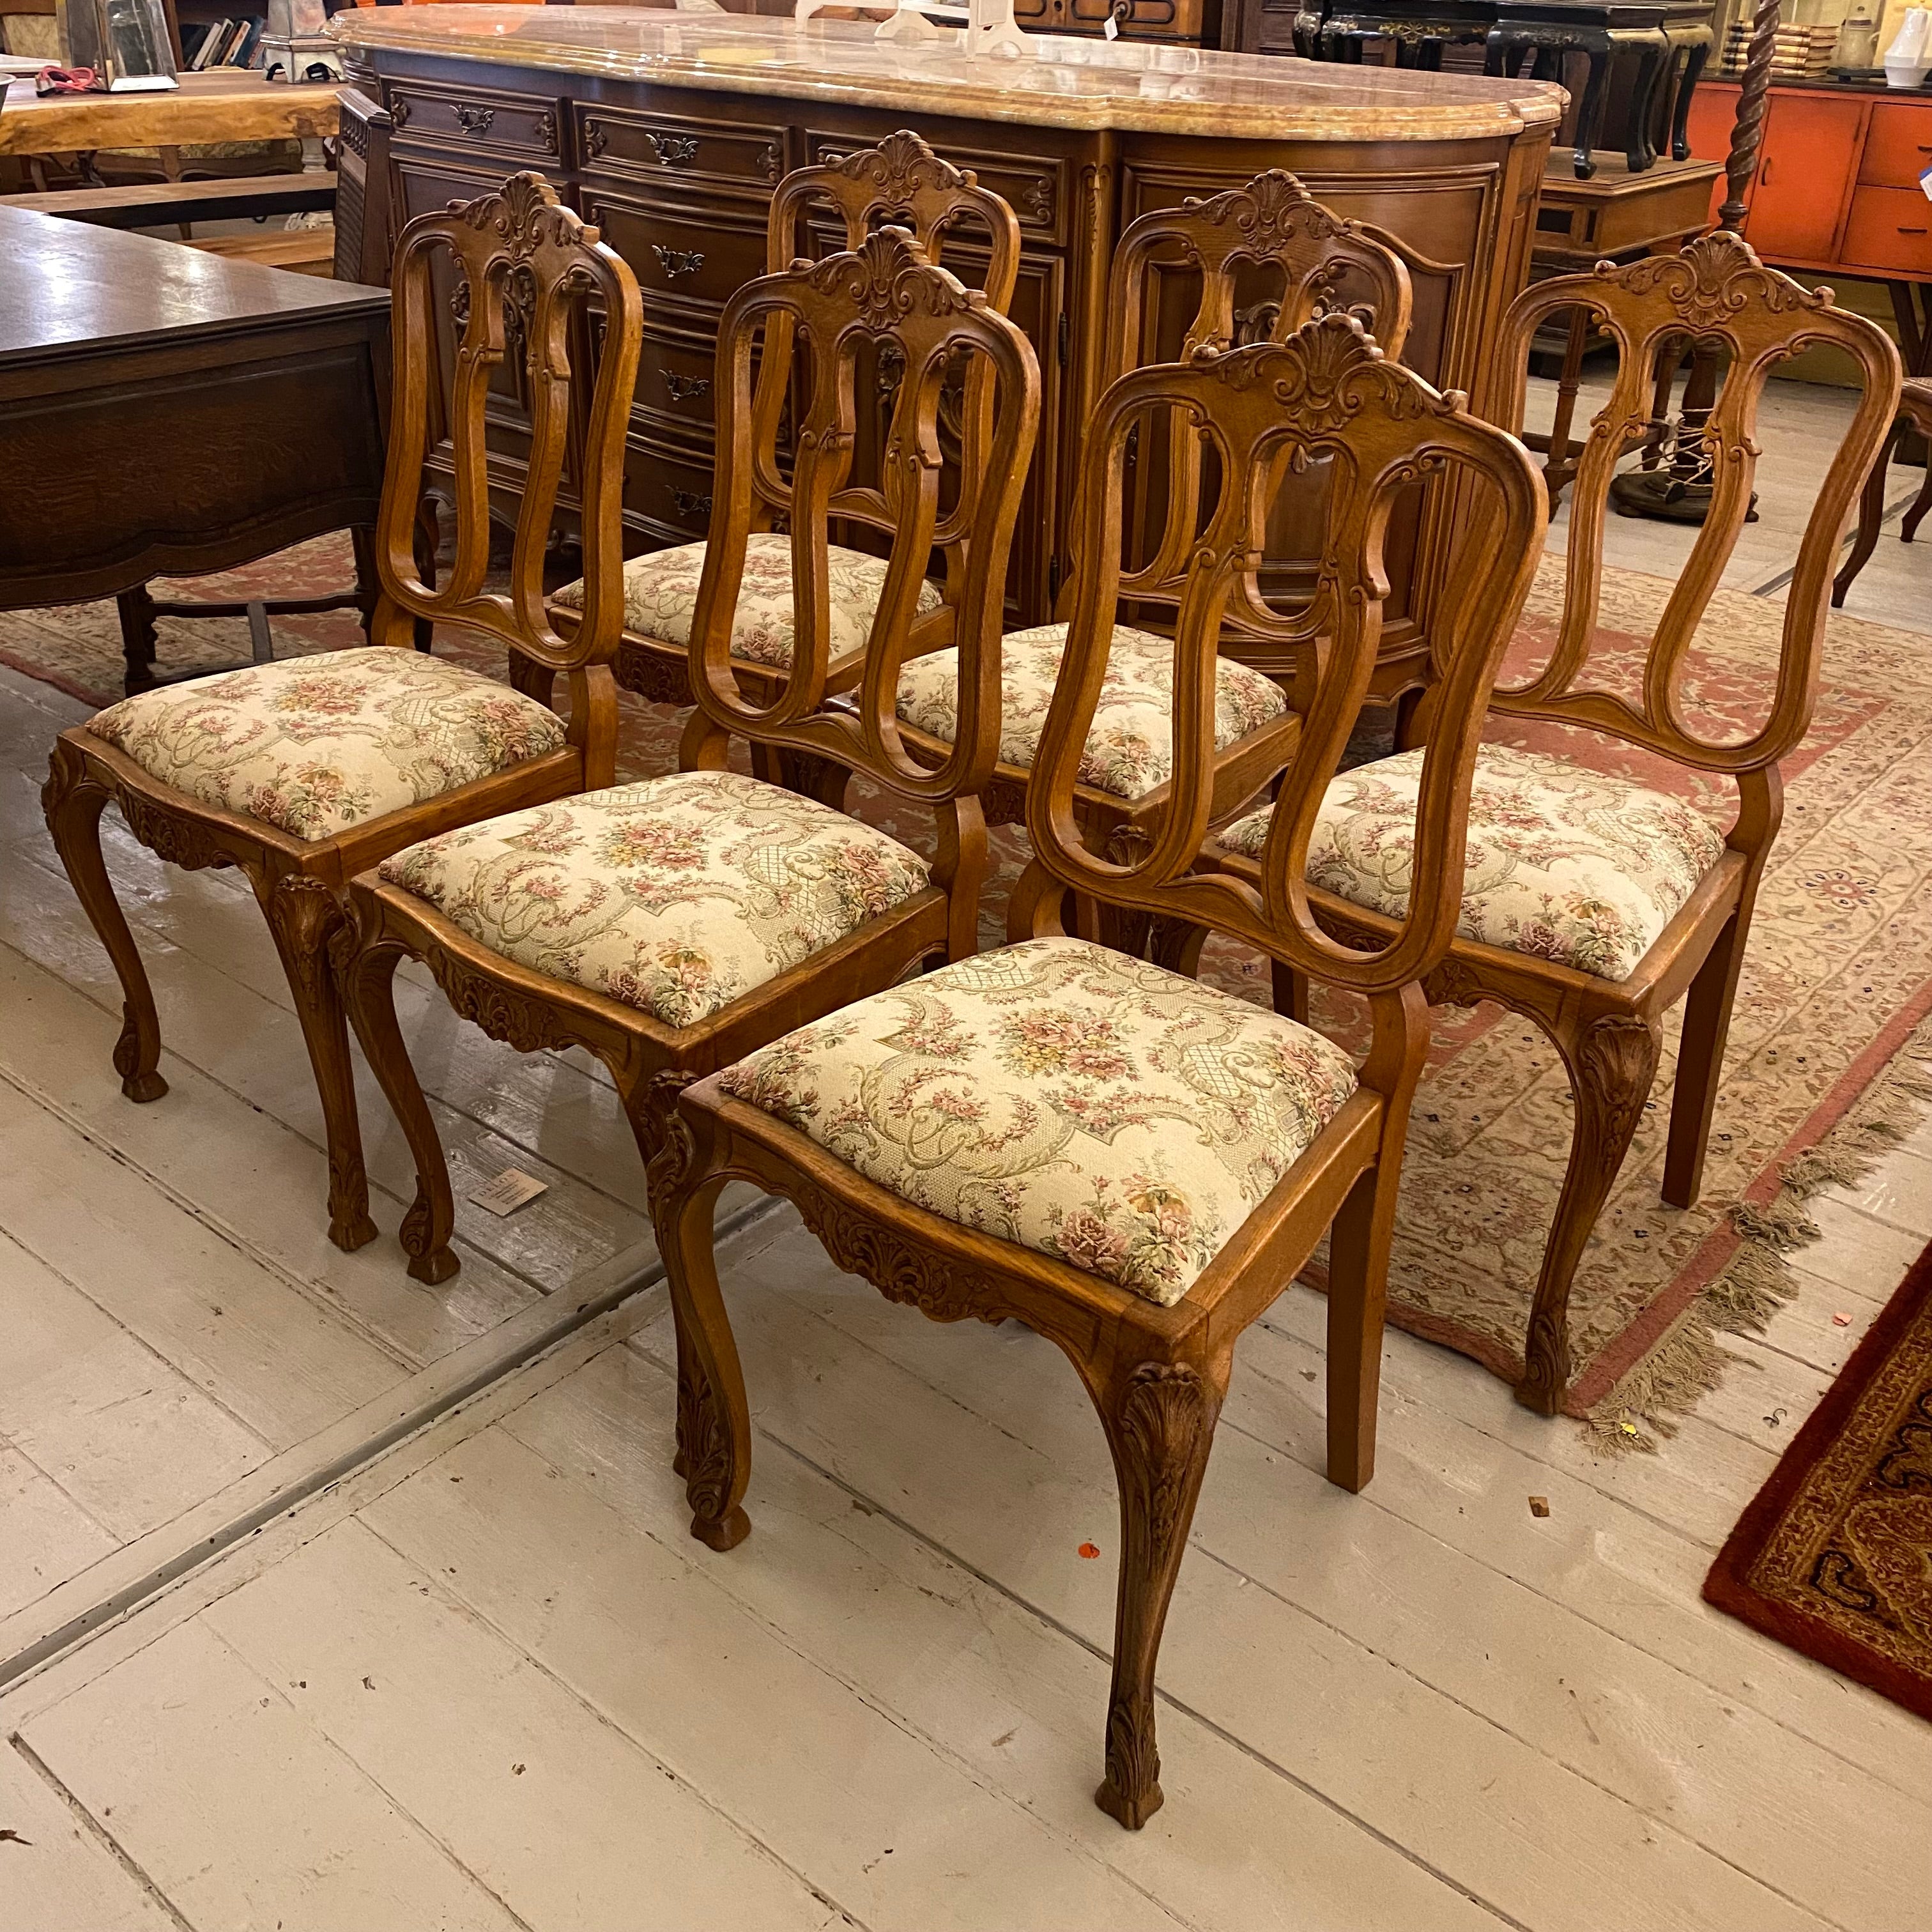 Antique French Oak Dining Chairs (Six)